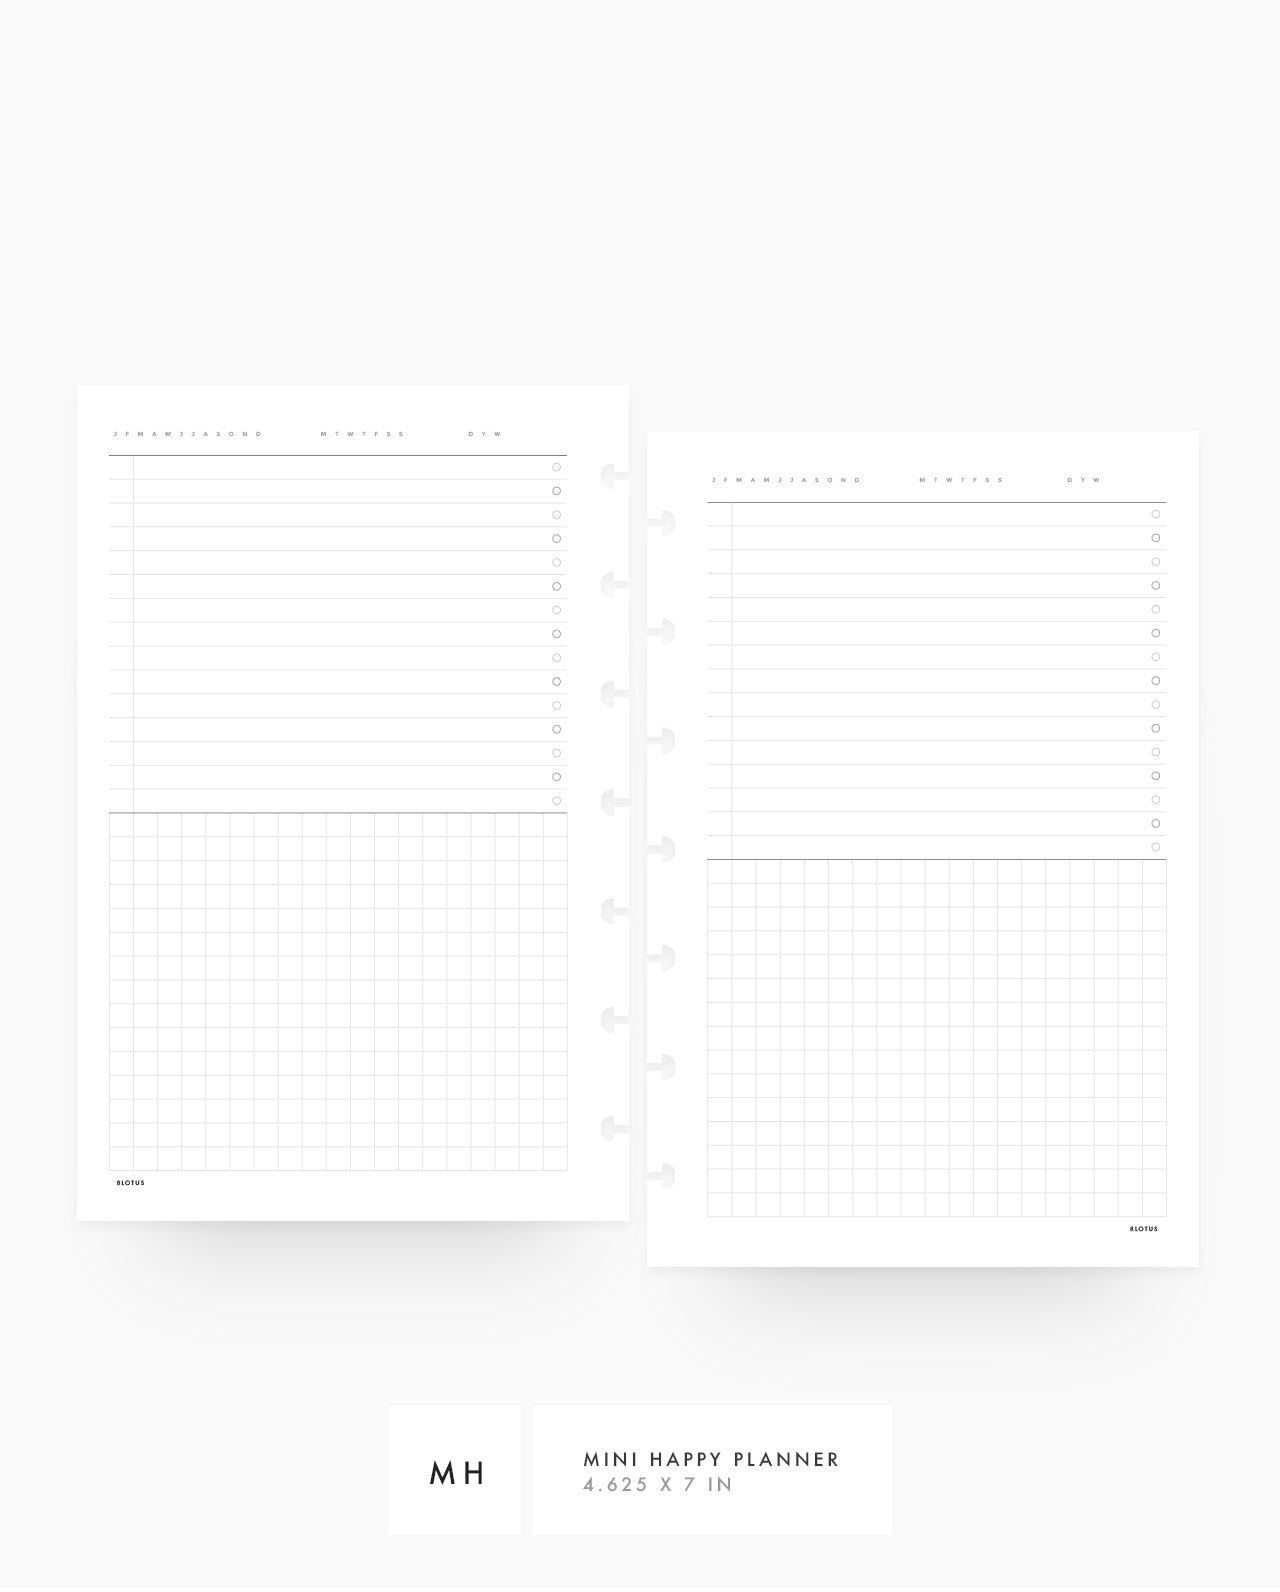 Weekly Planner A6 Planner Inserts, Weekly Schedule, A6 Refill, PRINTABLE -   Denmark